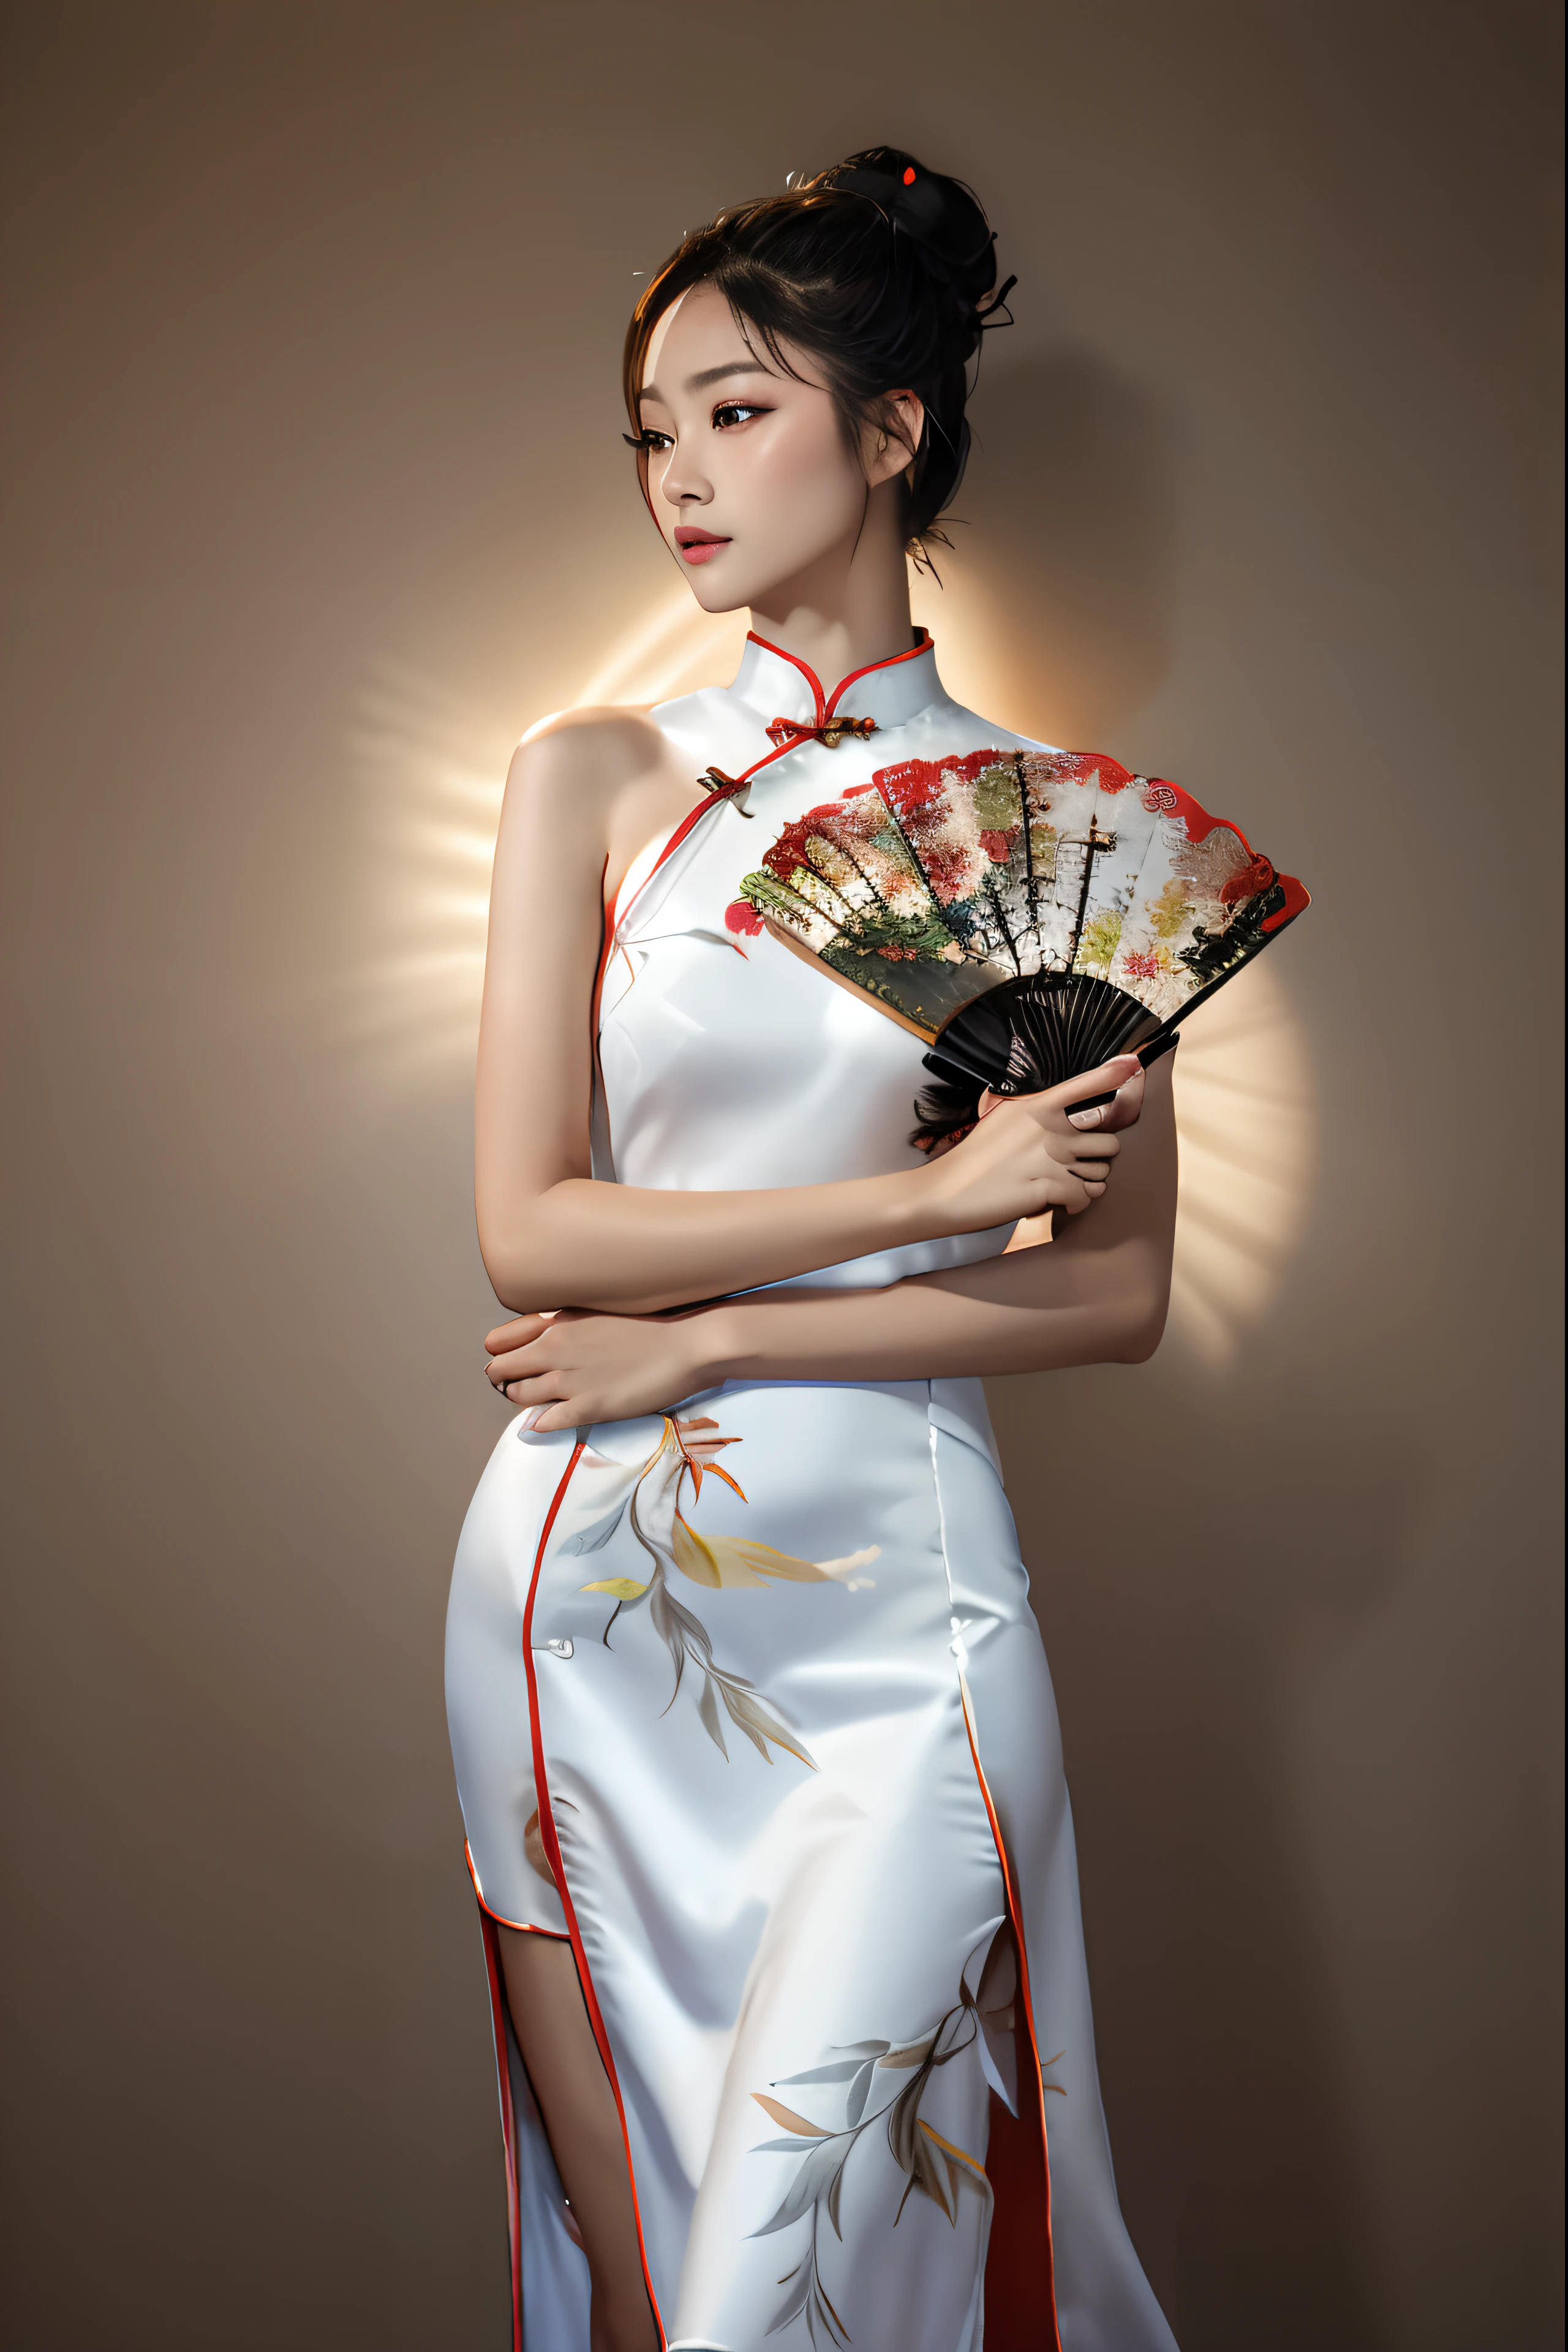 1girl in, (((Roll your hair into a bun))), (((Bright cheongsam))), (((White cheongsam mini dress))), Tight dress、(tmasterpiece, top-quality, Near and far law), Beautiful expression, 8k, RAW photogr, nffsw, Photorealsitic, Film grains, color difference, A high resolution, ultra - detailed, finedetail, Dynamic Lighting, Dramatic lighting、shadowy、extremely detailed eye and face、Round pupils、bare shoulders​，The woman holds a fan，Chinese outfit, Chinese dress, high - end fashion photoshoot, Chinese style